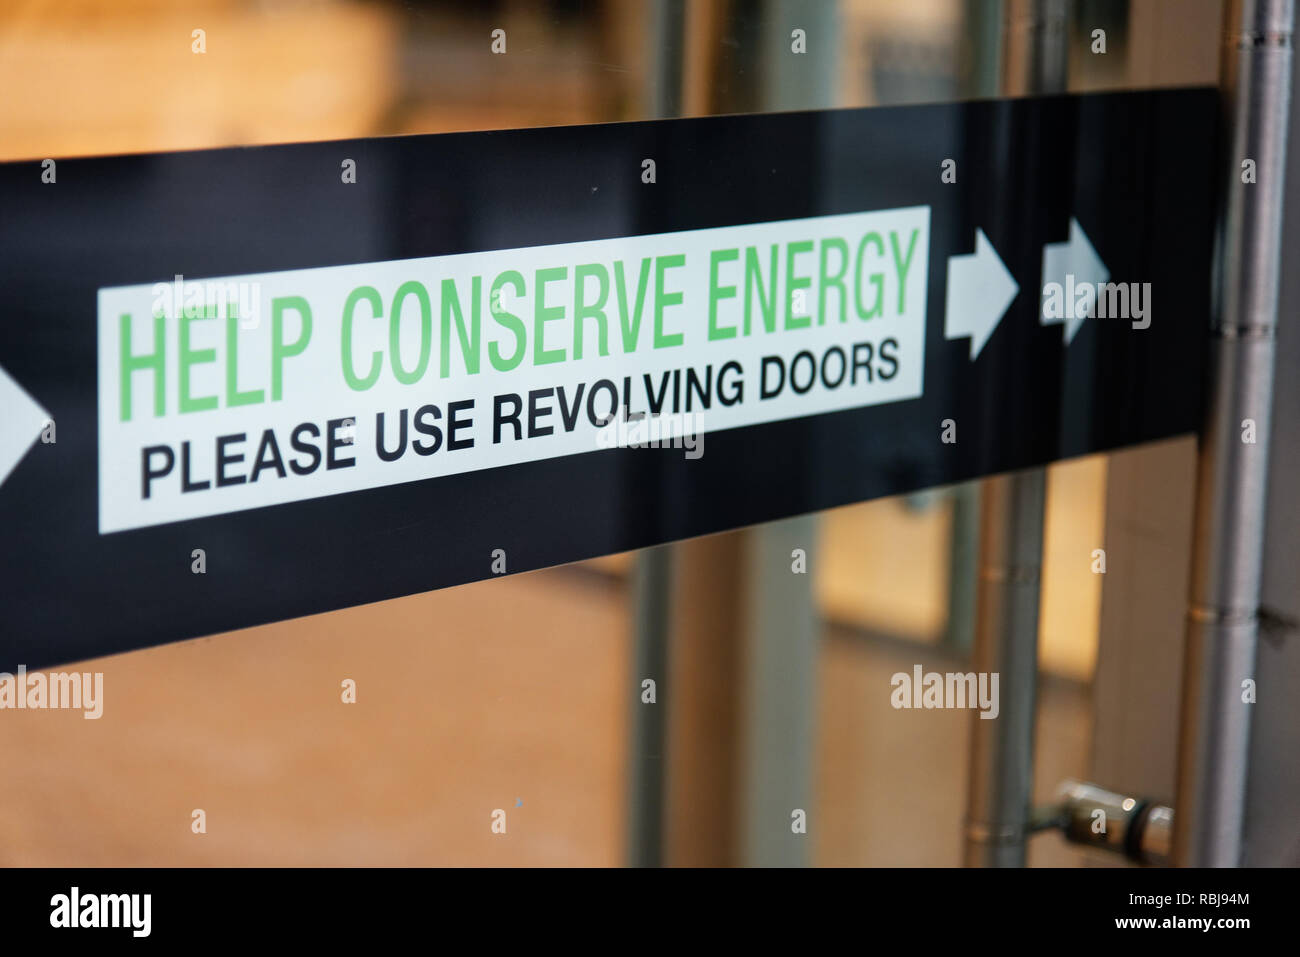 A sign in a Toronto building saying Help Conserve Energy - Please Use Revolving Doors Stock Photo